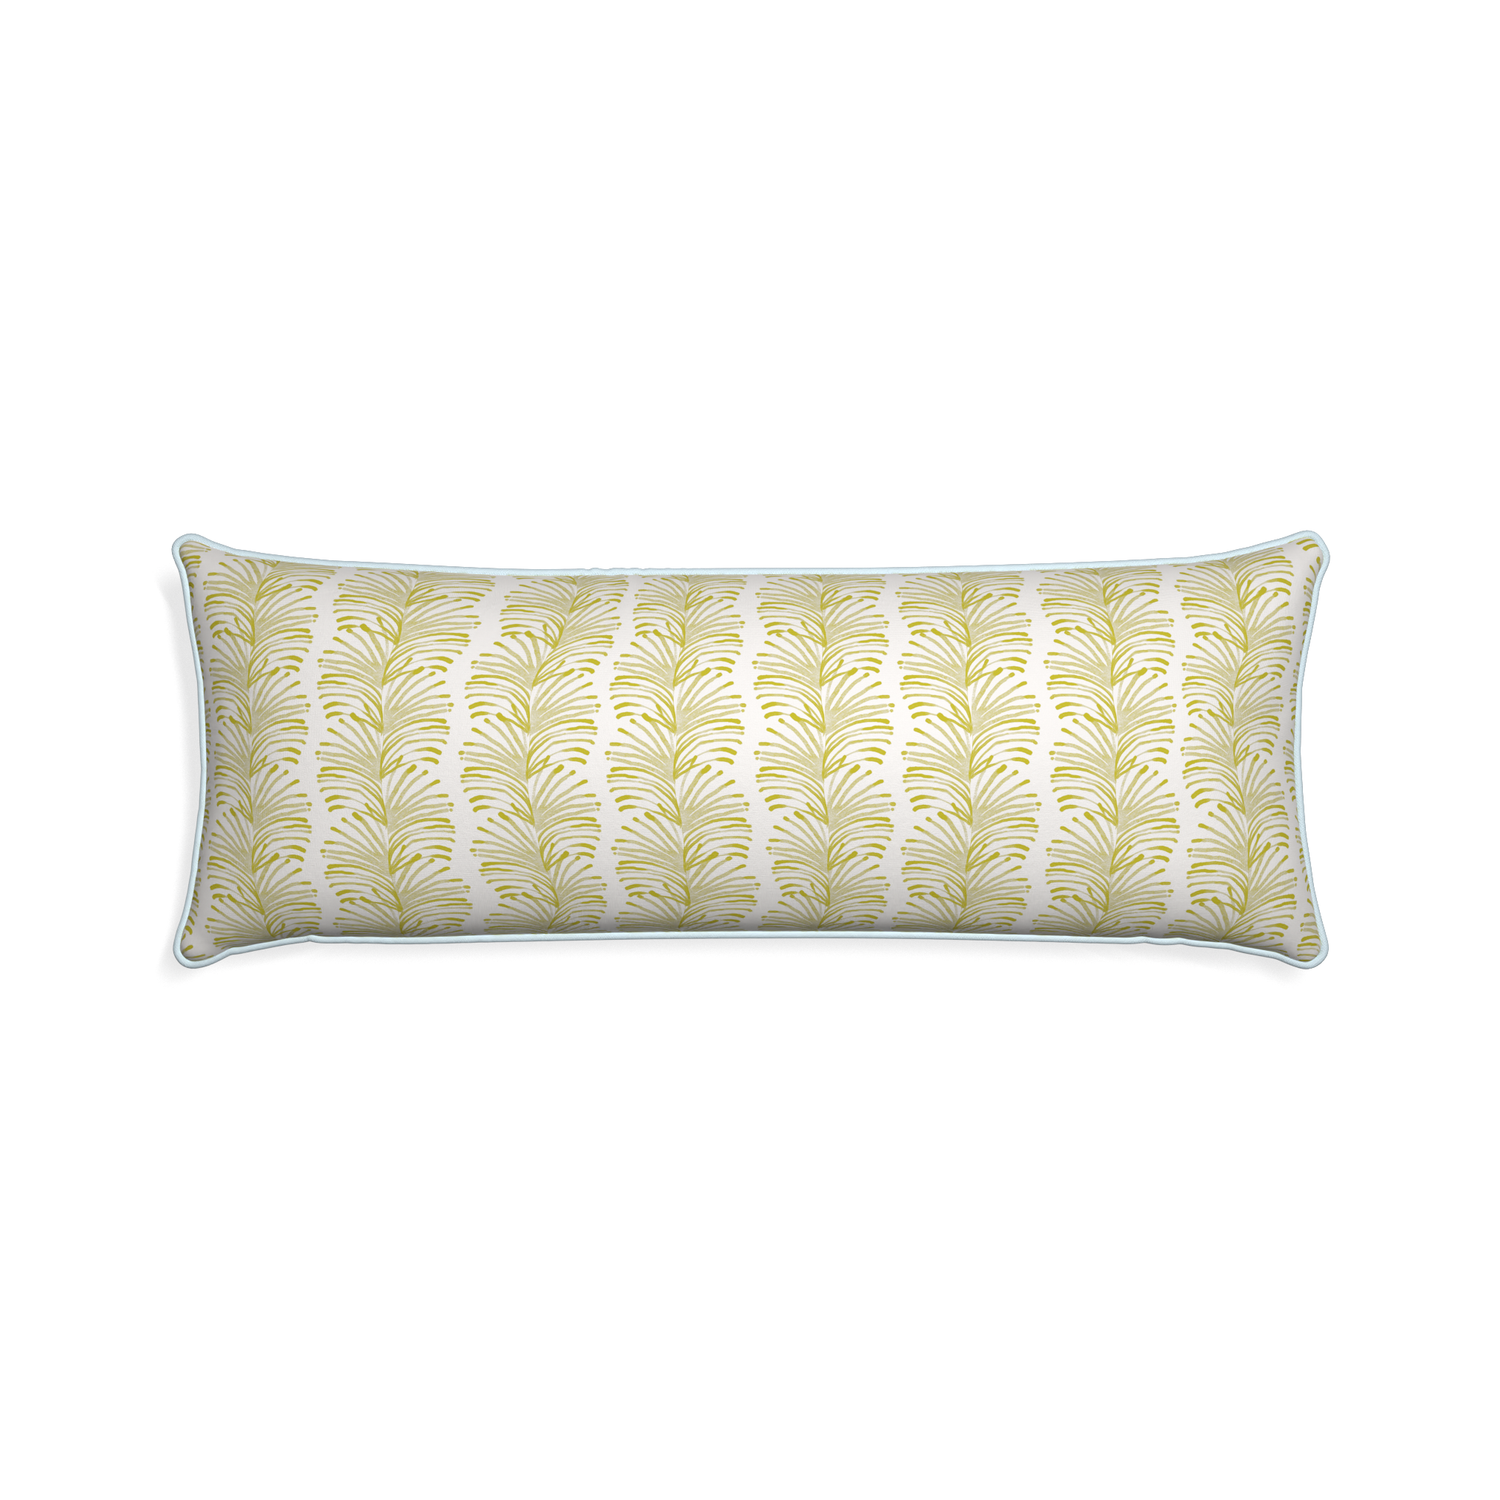 Xl-lumbar emma chartreuse custom pillow with powder piping on white background